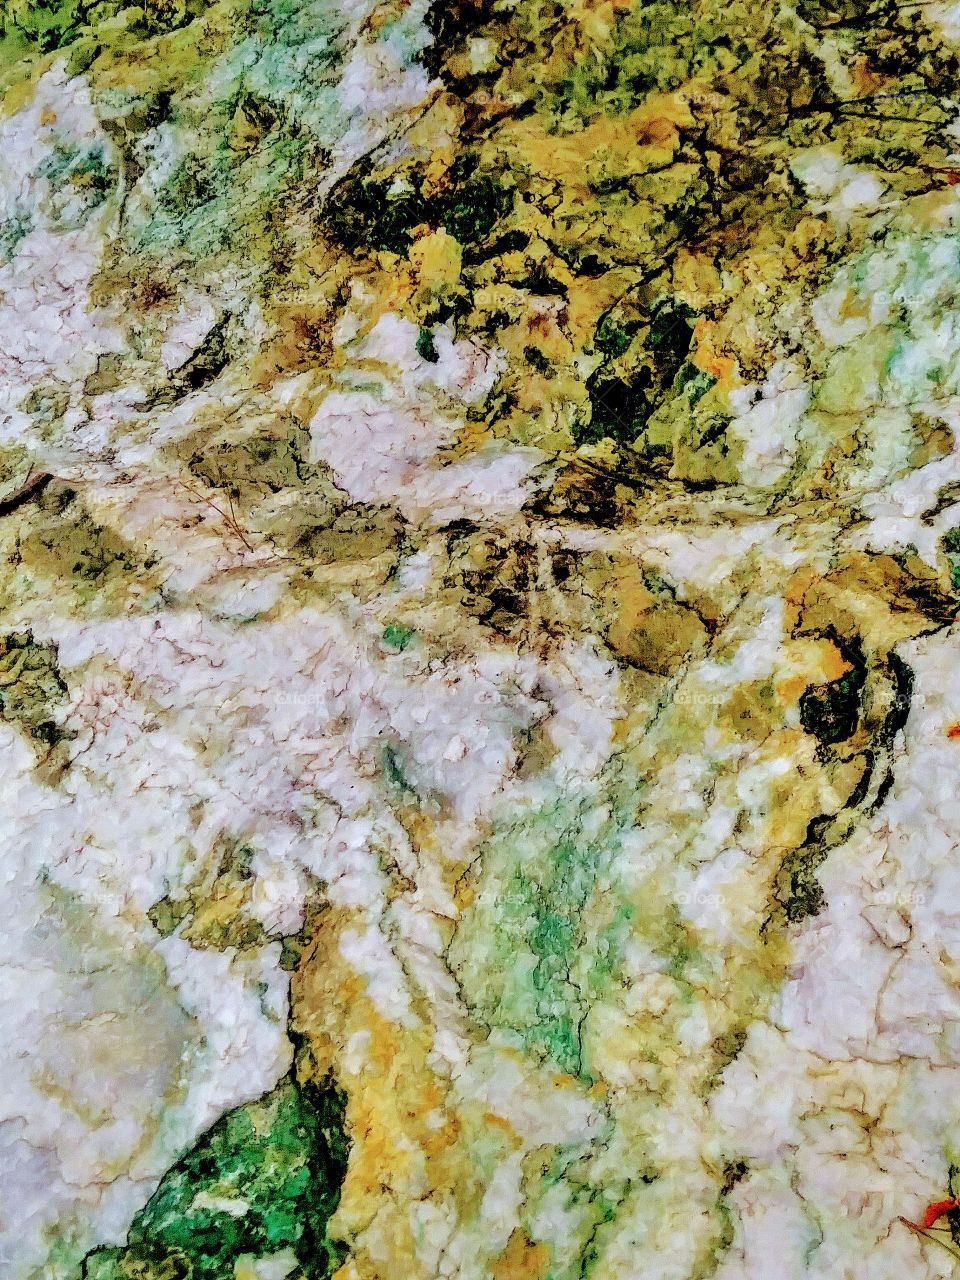 close up of mineral pattern on rock. tans yellow tones black green